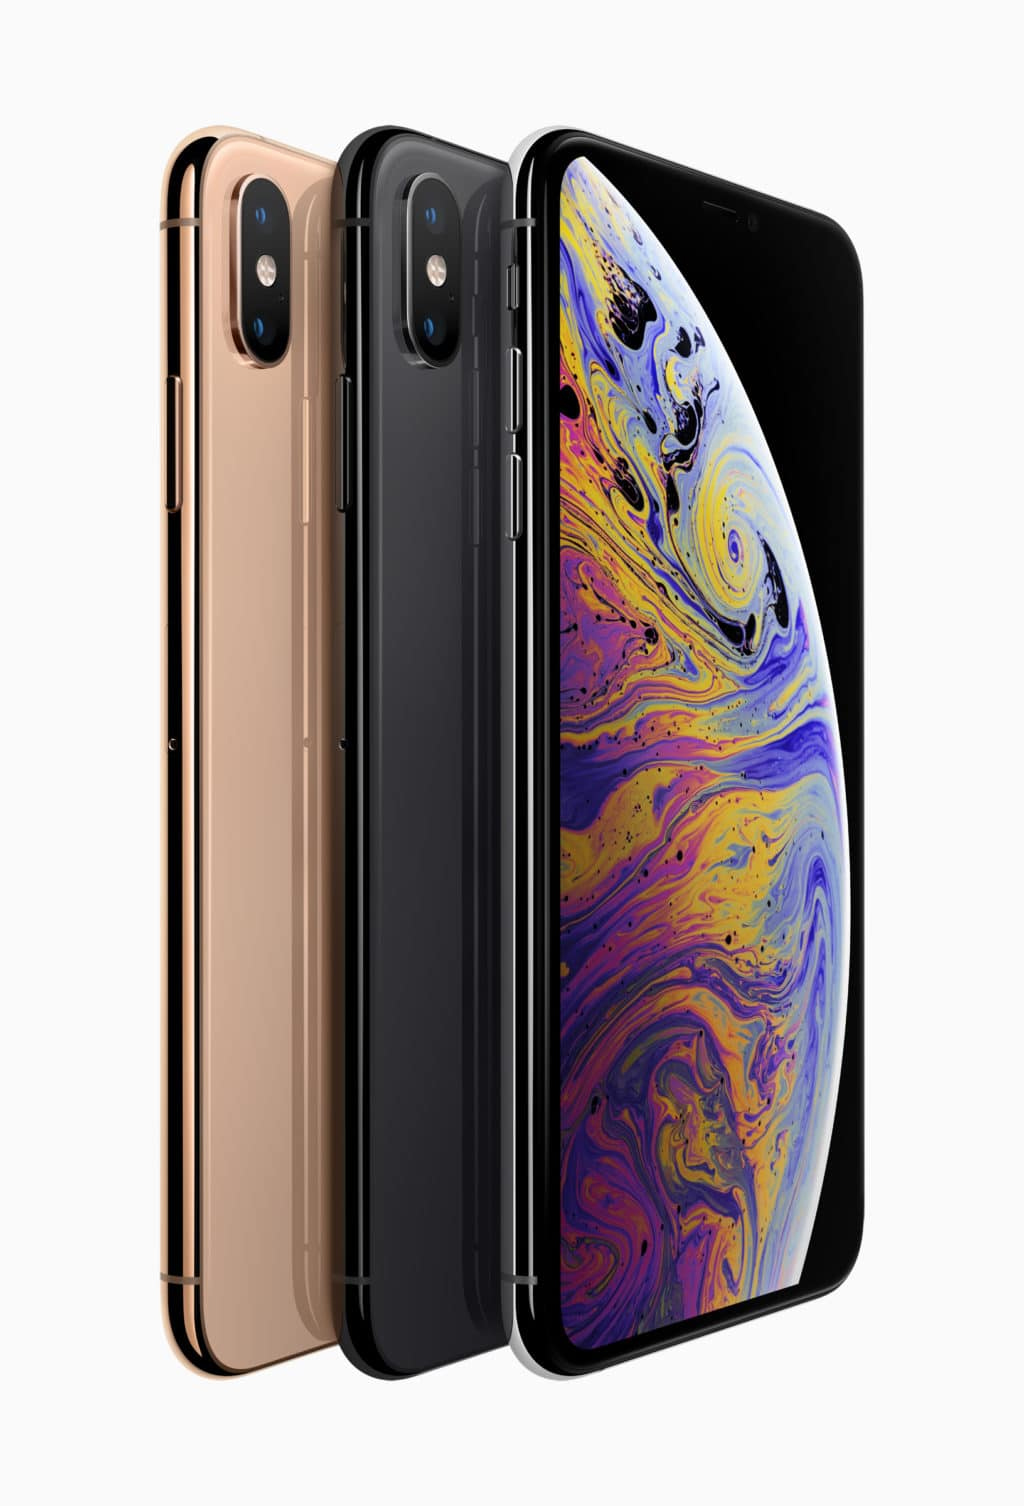 Apple Iphone Xs Max Pictures Official Photos Whatmobile